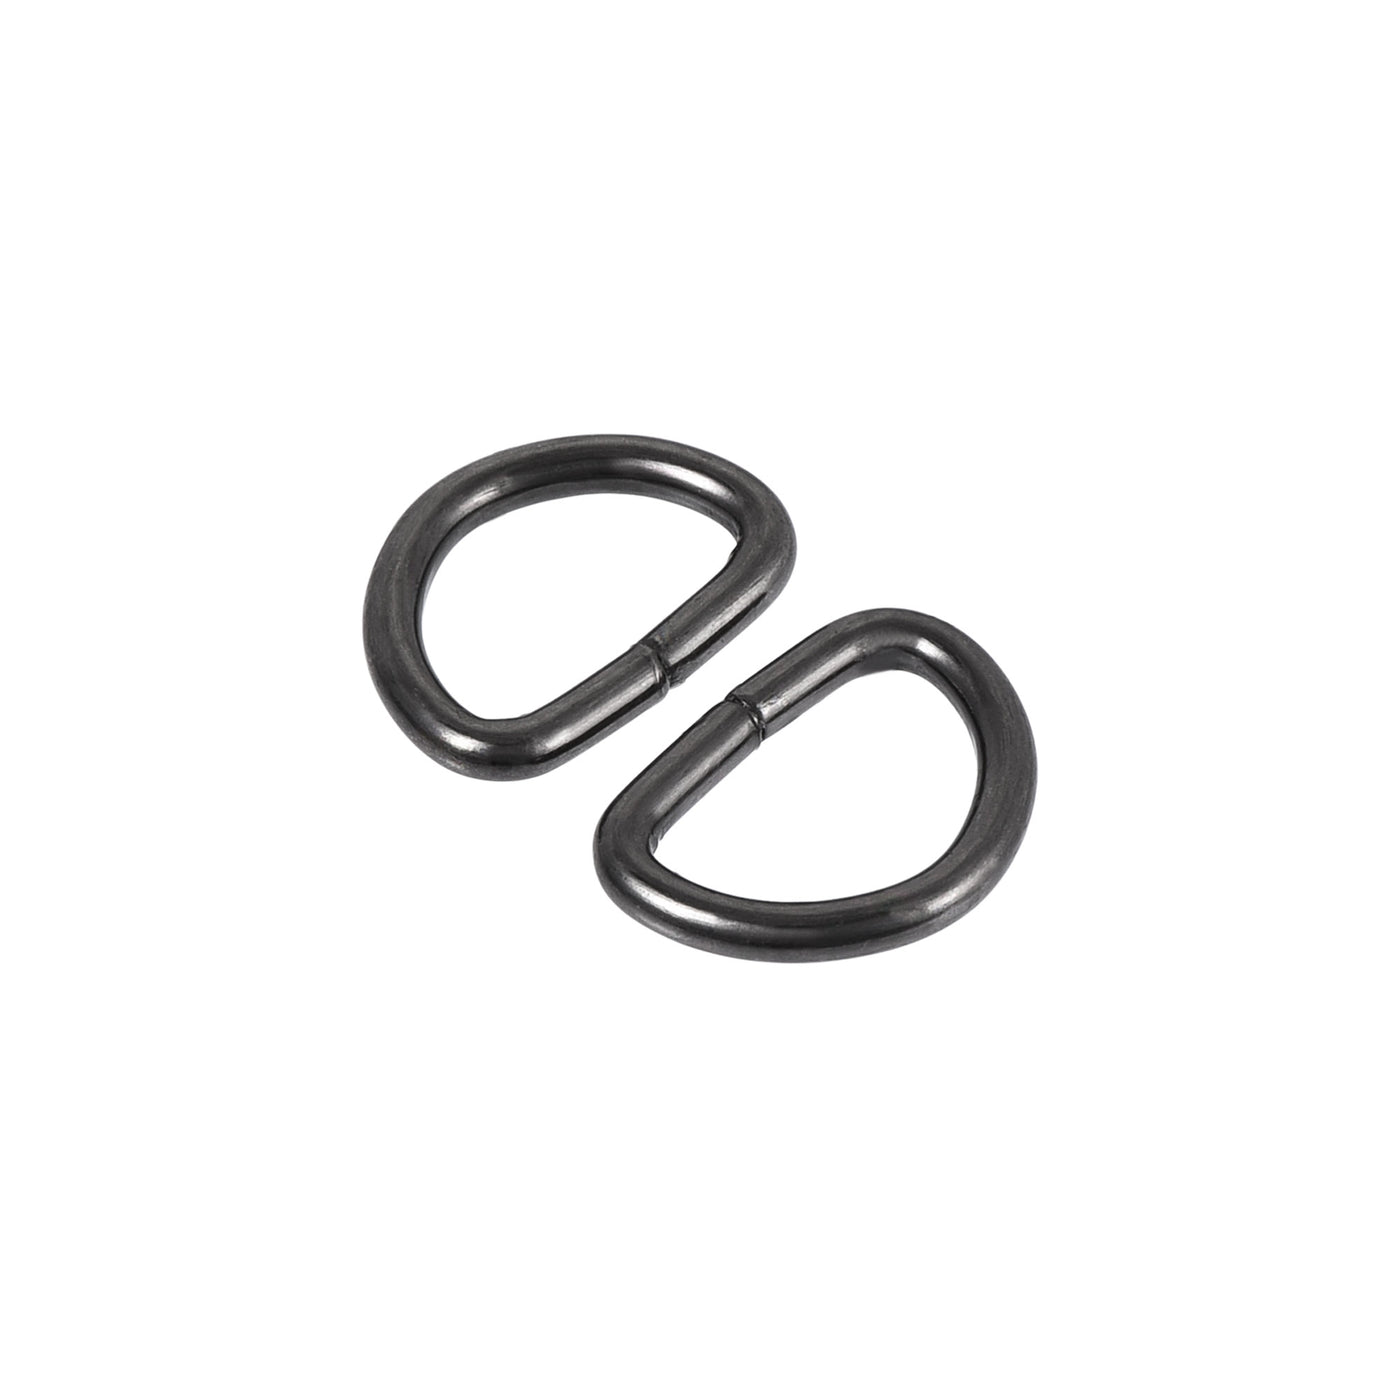 uxcell Uxcell Metal D Ring 0.39"(10mm) D-Rings Buckle for Hardware Bags Belts Craft DIY Accessories Black 50pcs